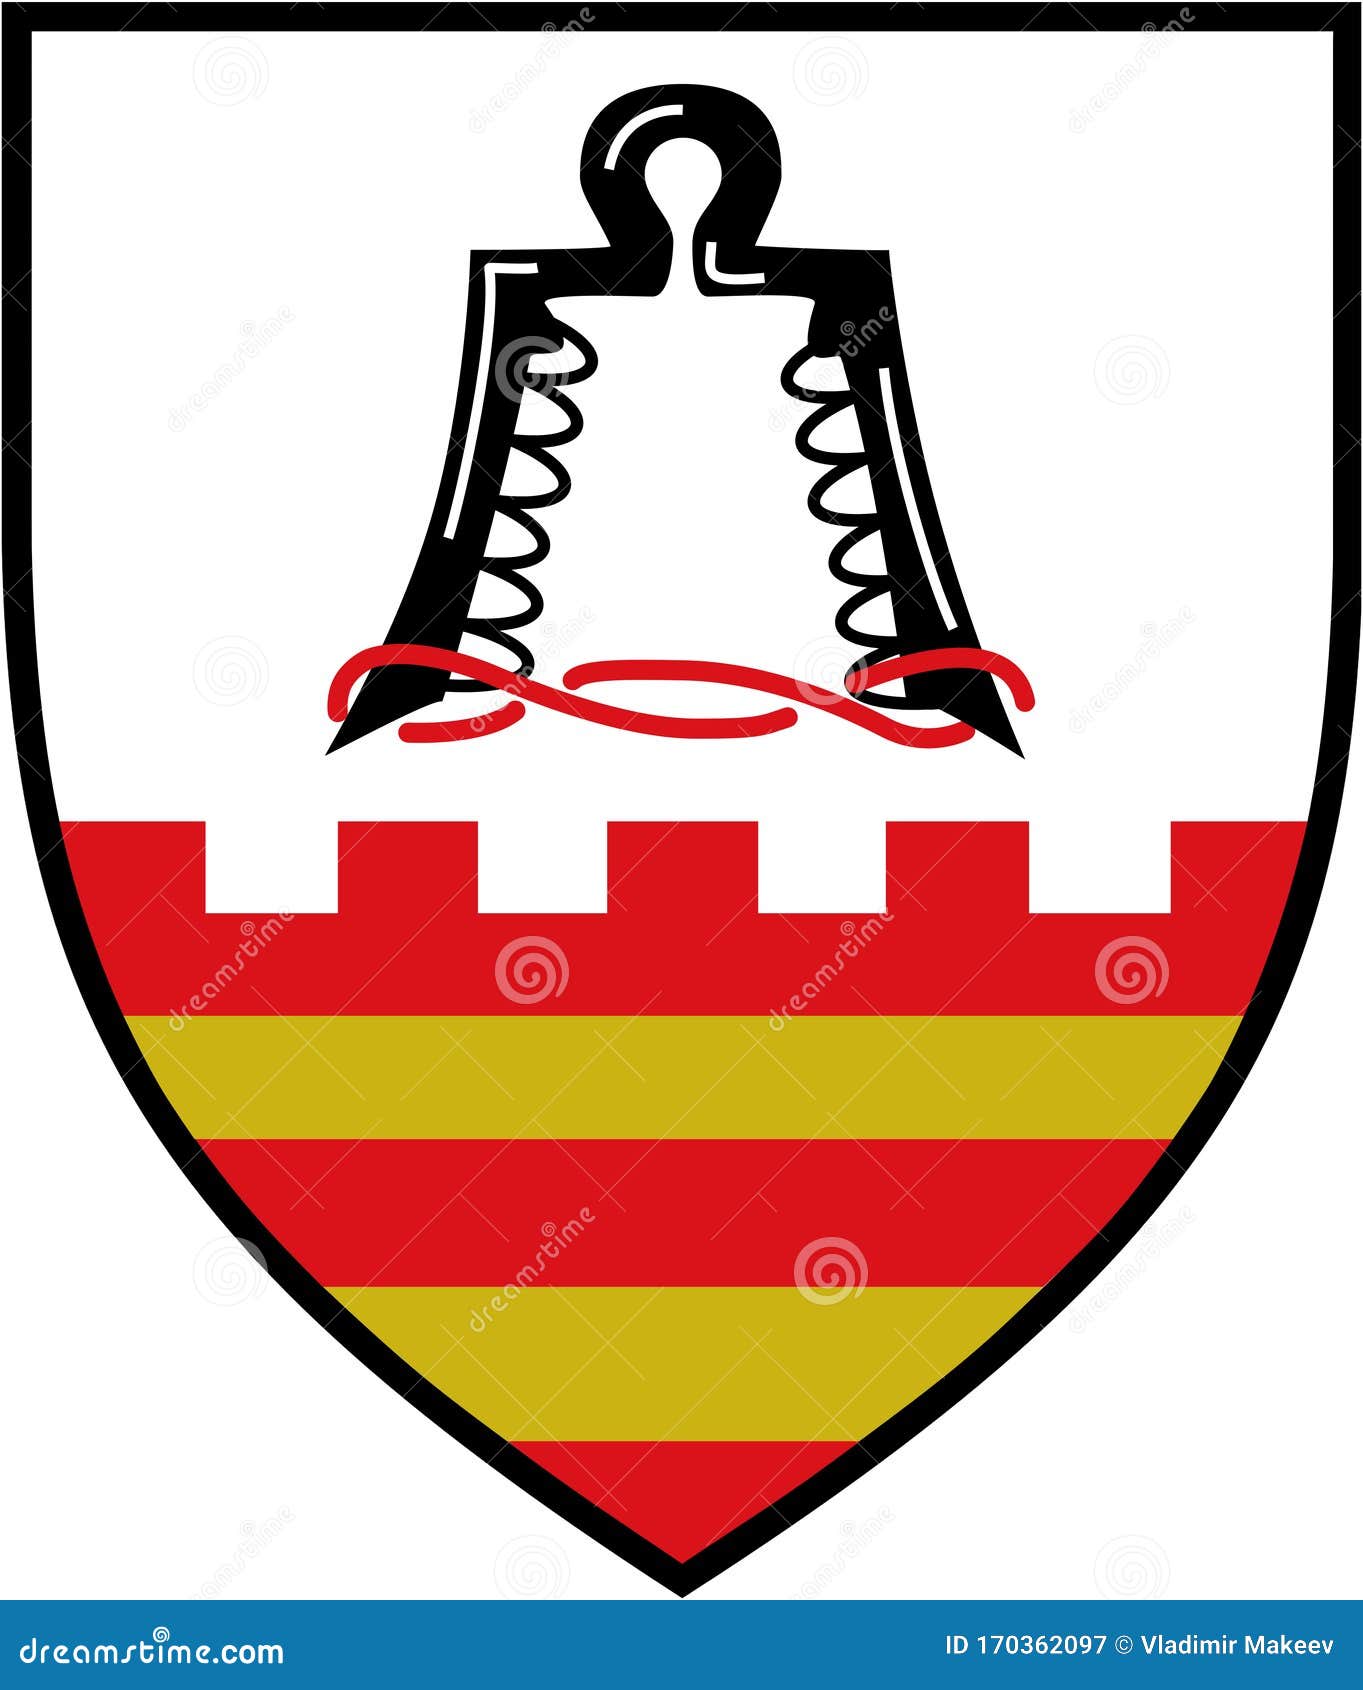 coat of arms of the commune of ense. germany